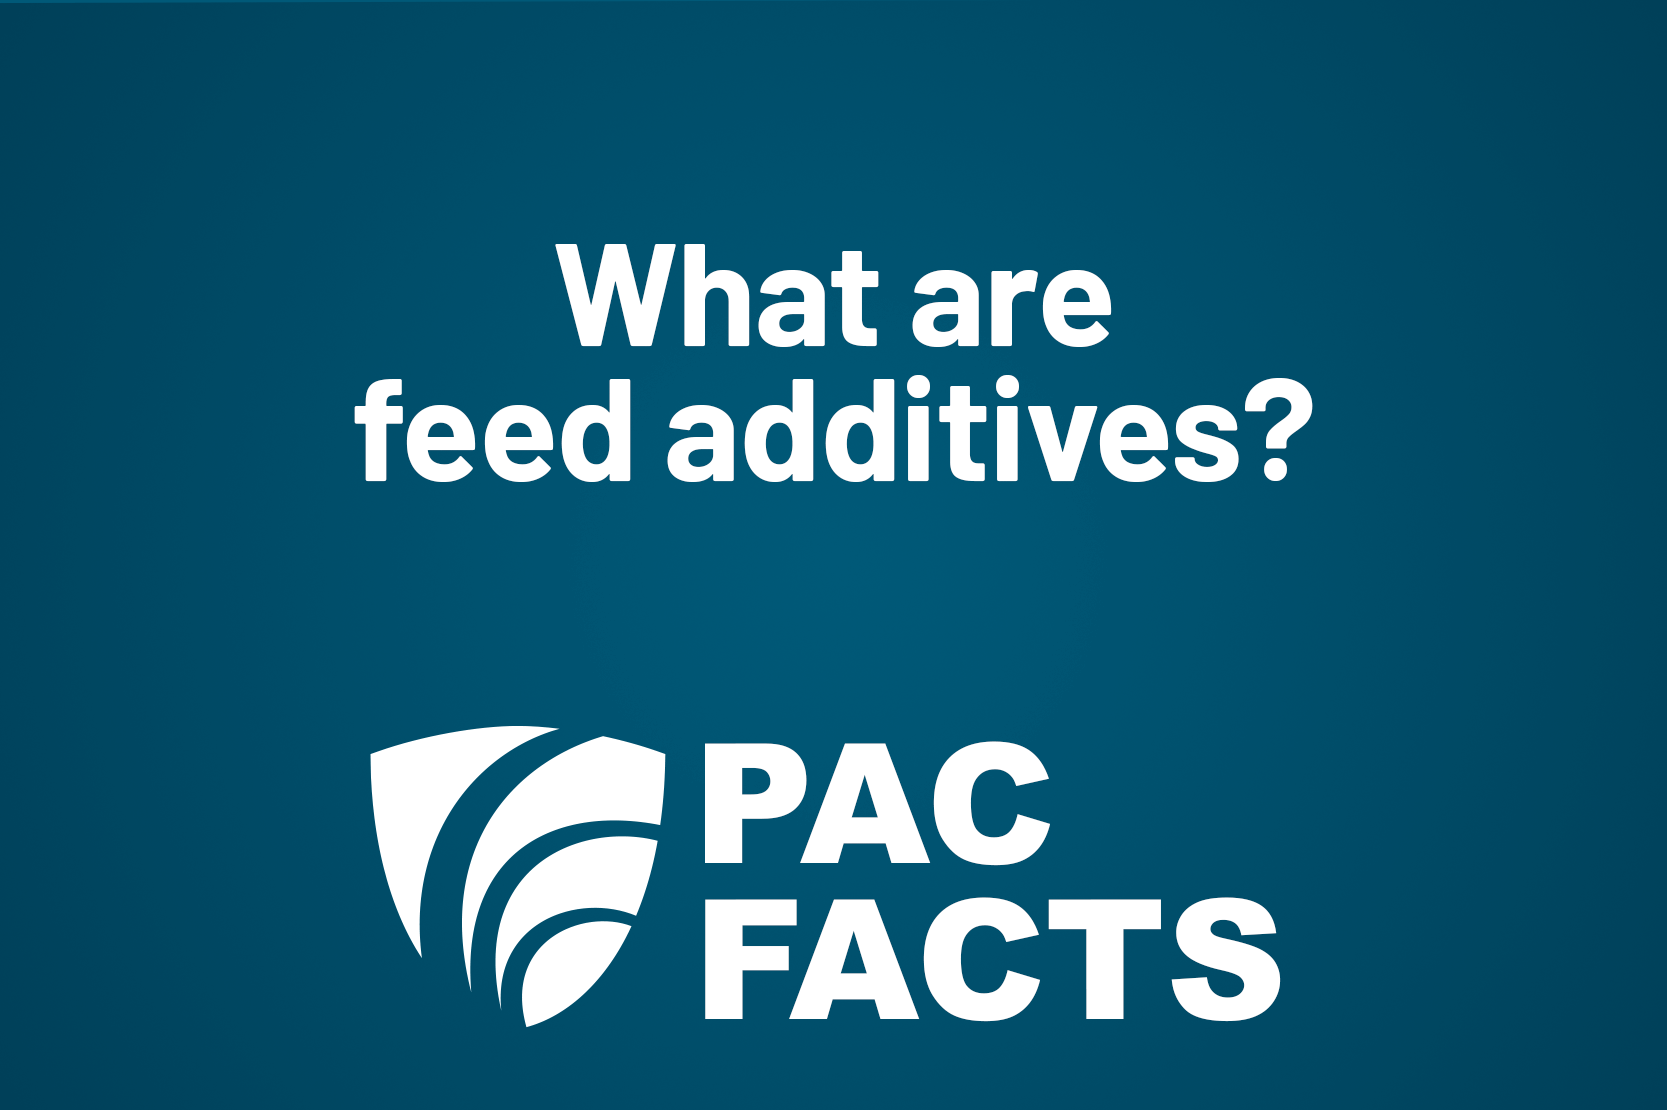 PAC Facts - What are feed additives?